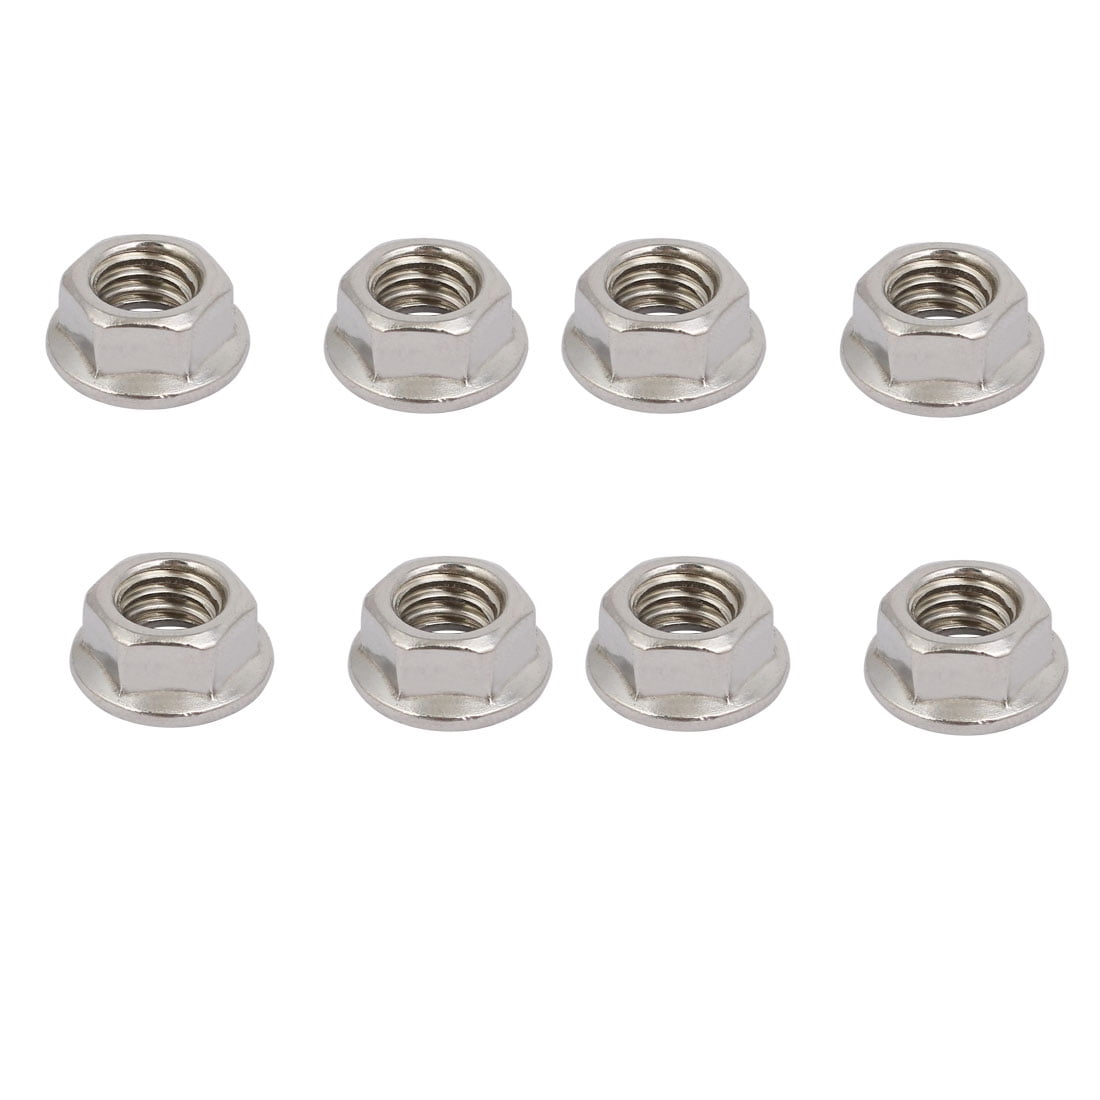 10mm Stainless Flange Nuts x10 M10 Stainless Steel Serrated Flange Nuts 